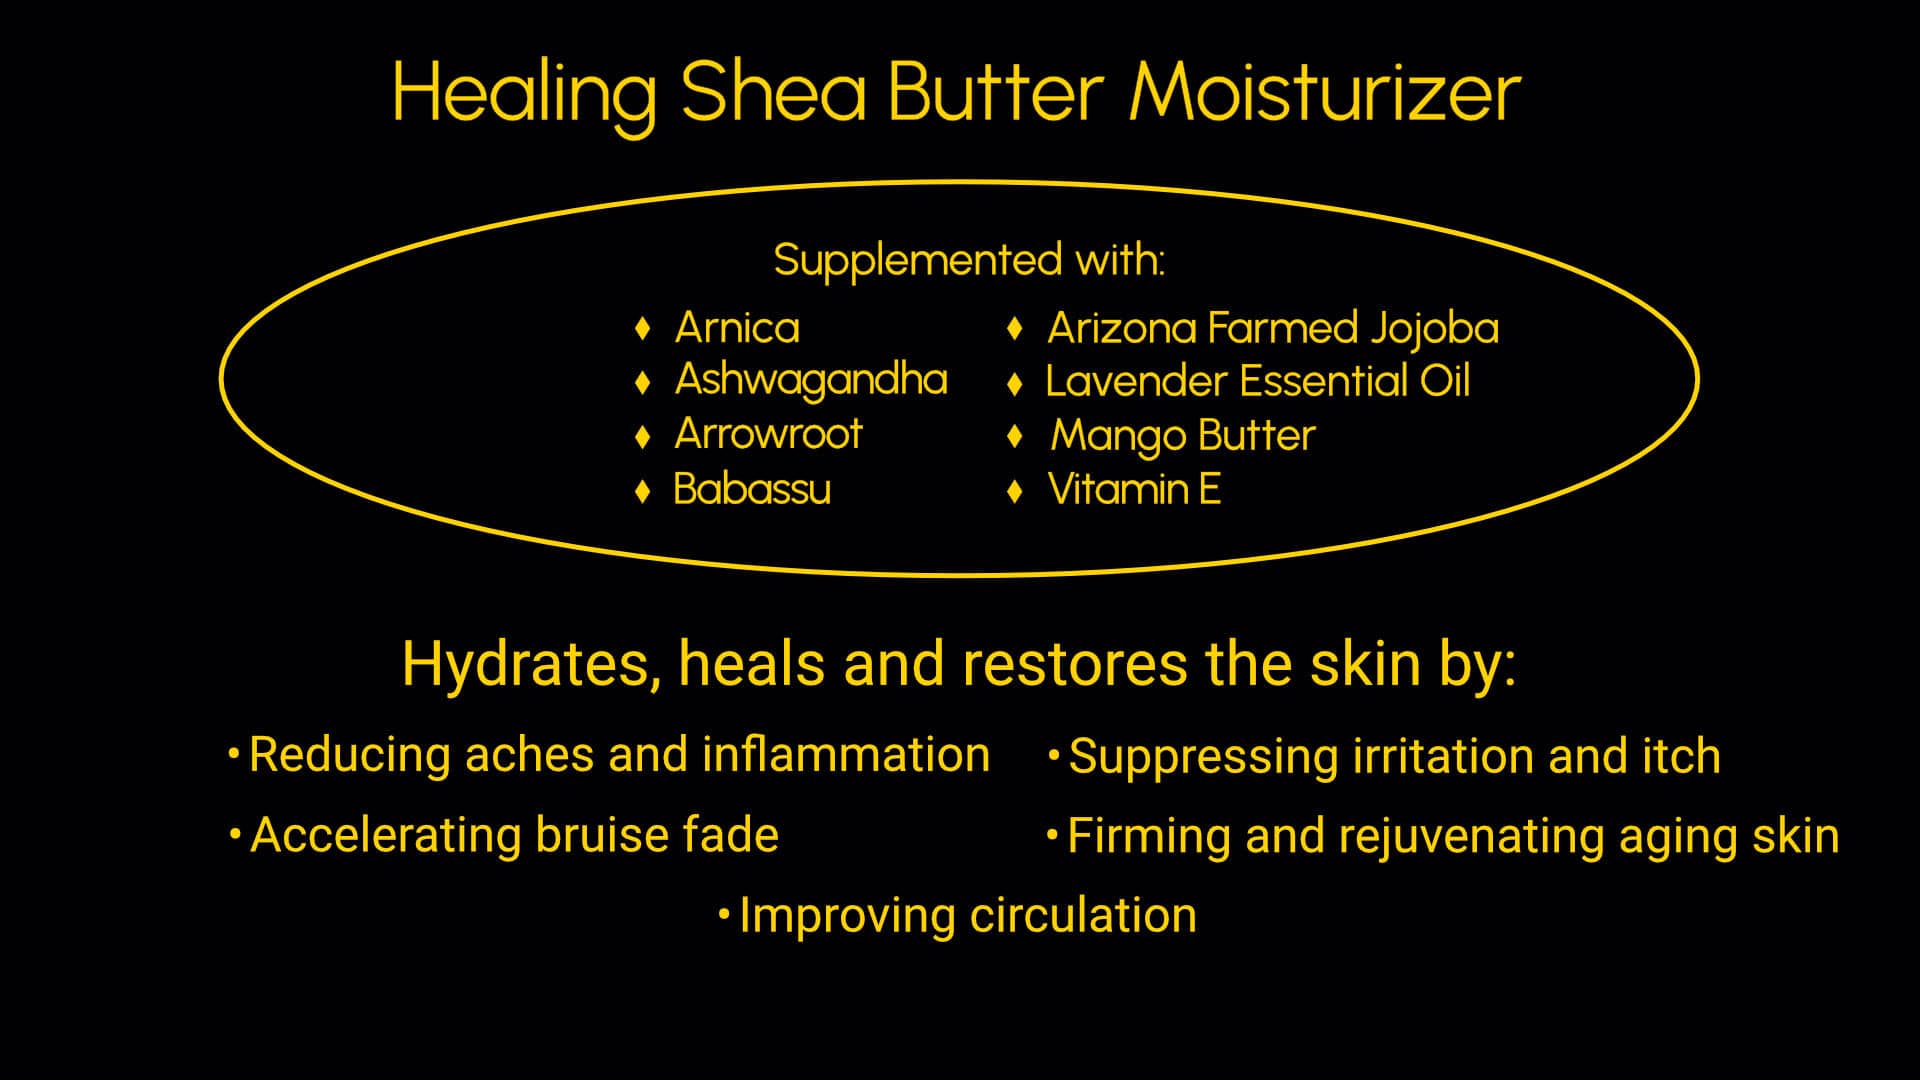 dp Shea Butter web page footer image